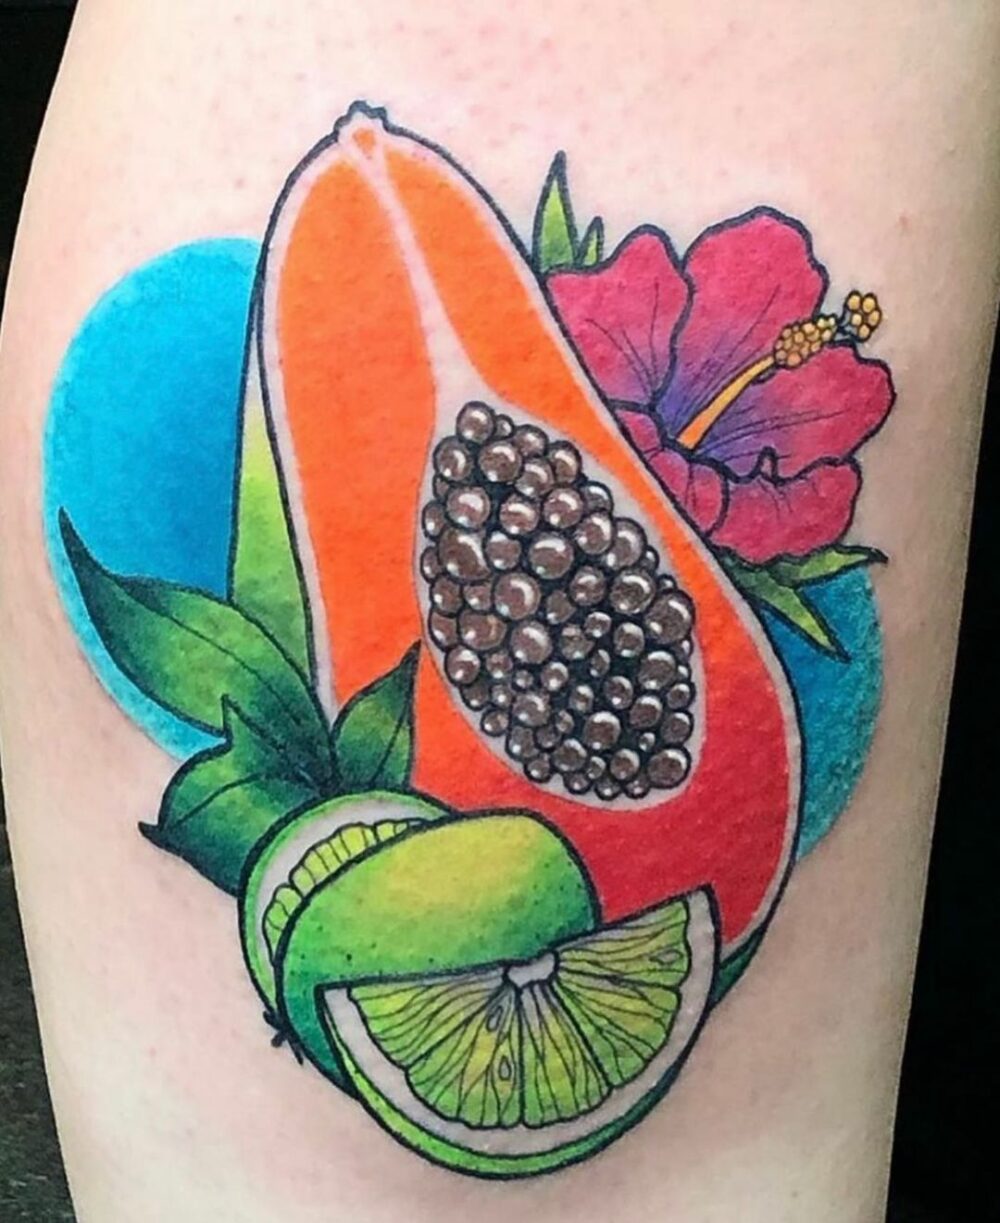 These papaya lemon food tattoos are a way of life that is more mindful of ones health.